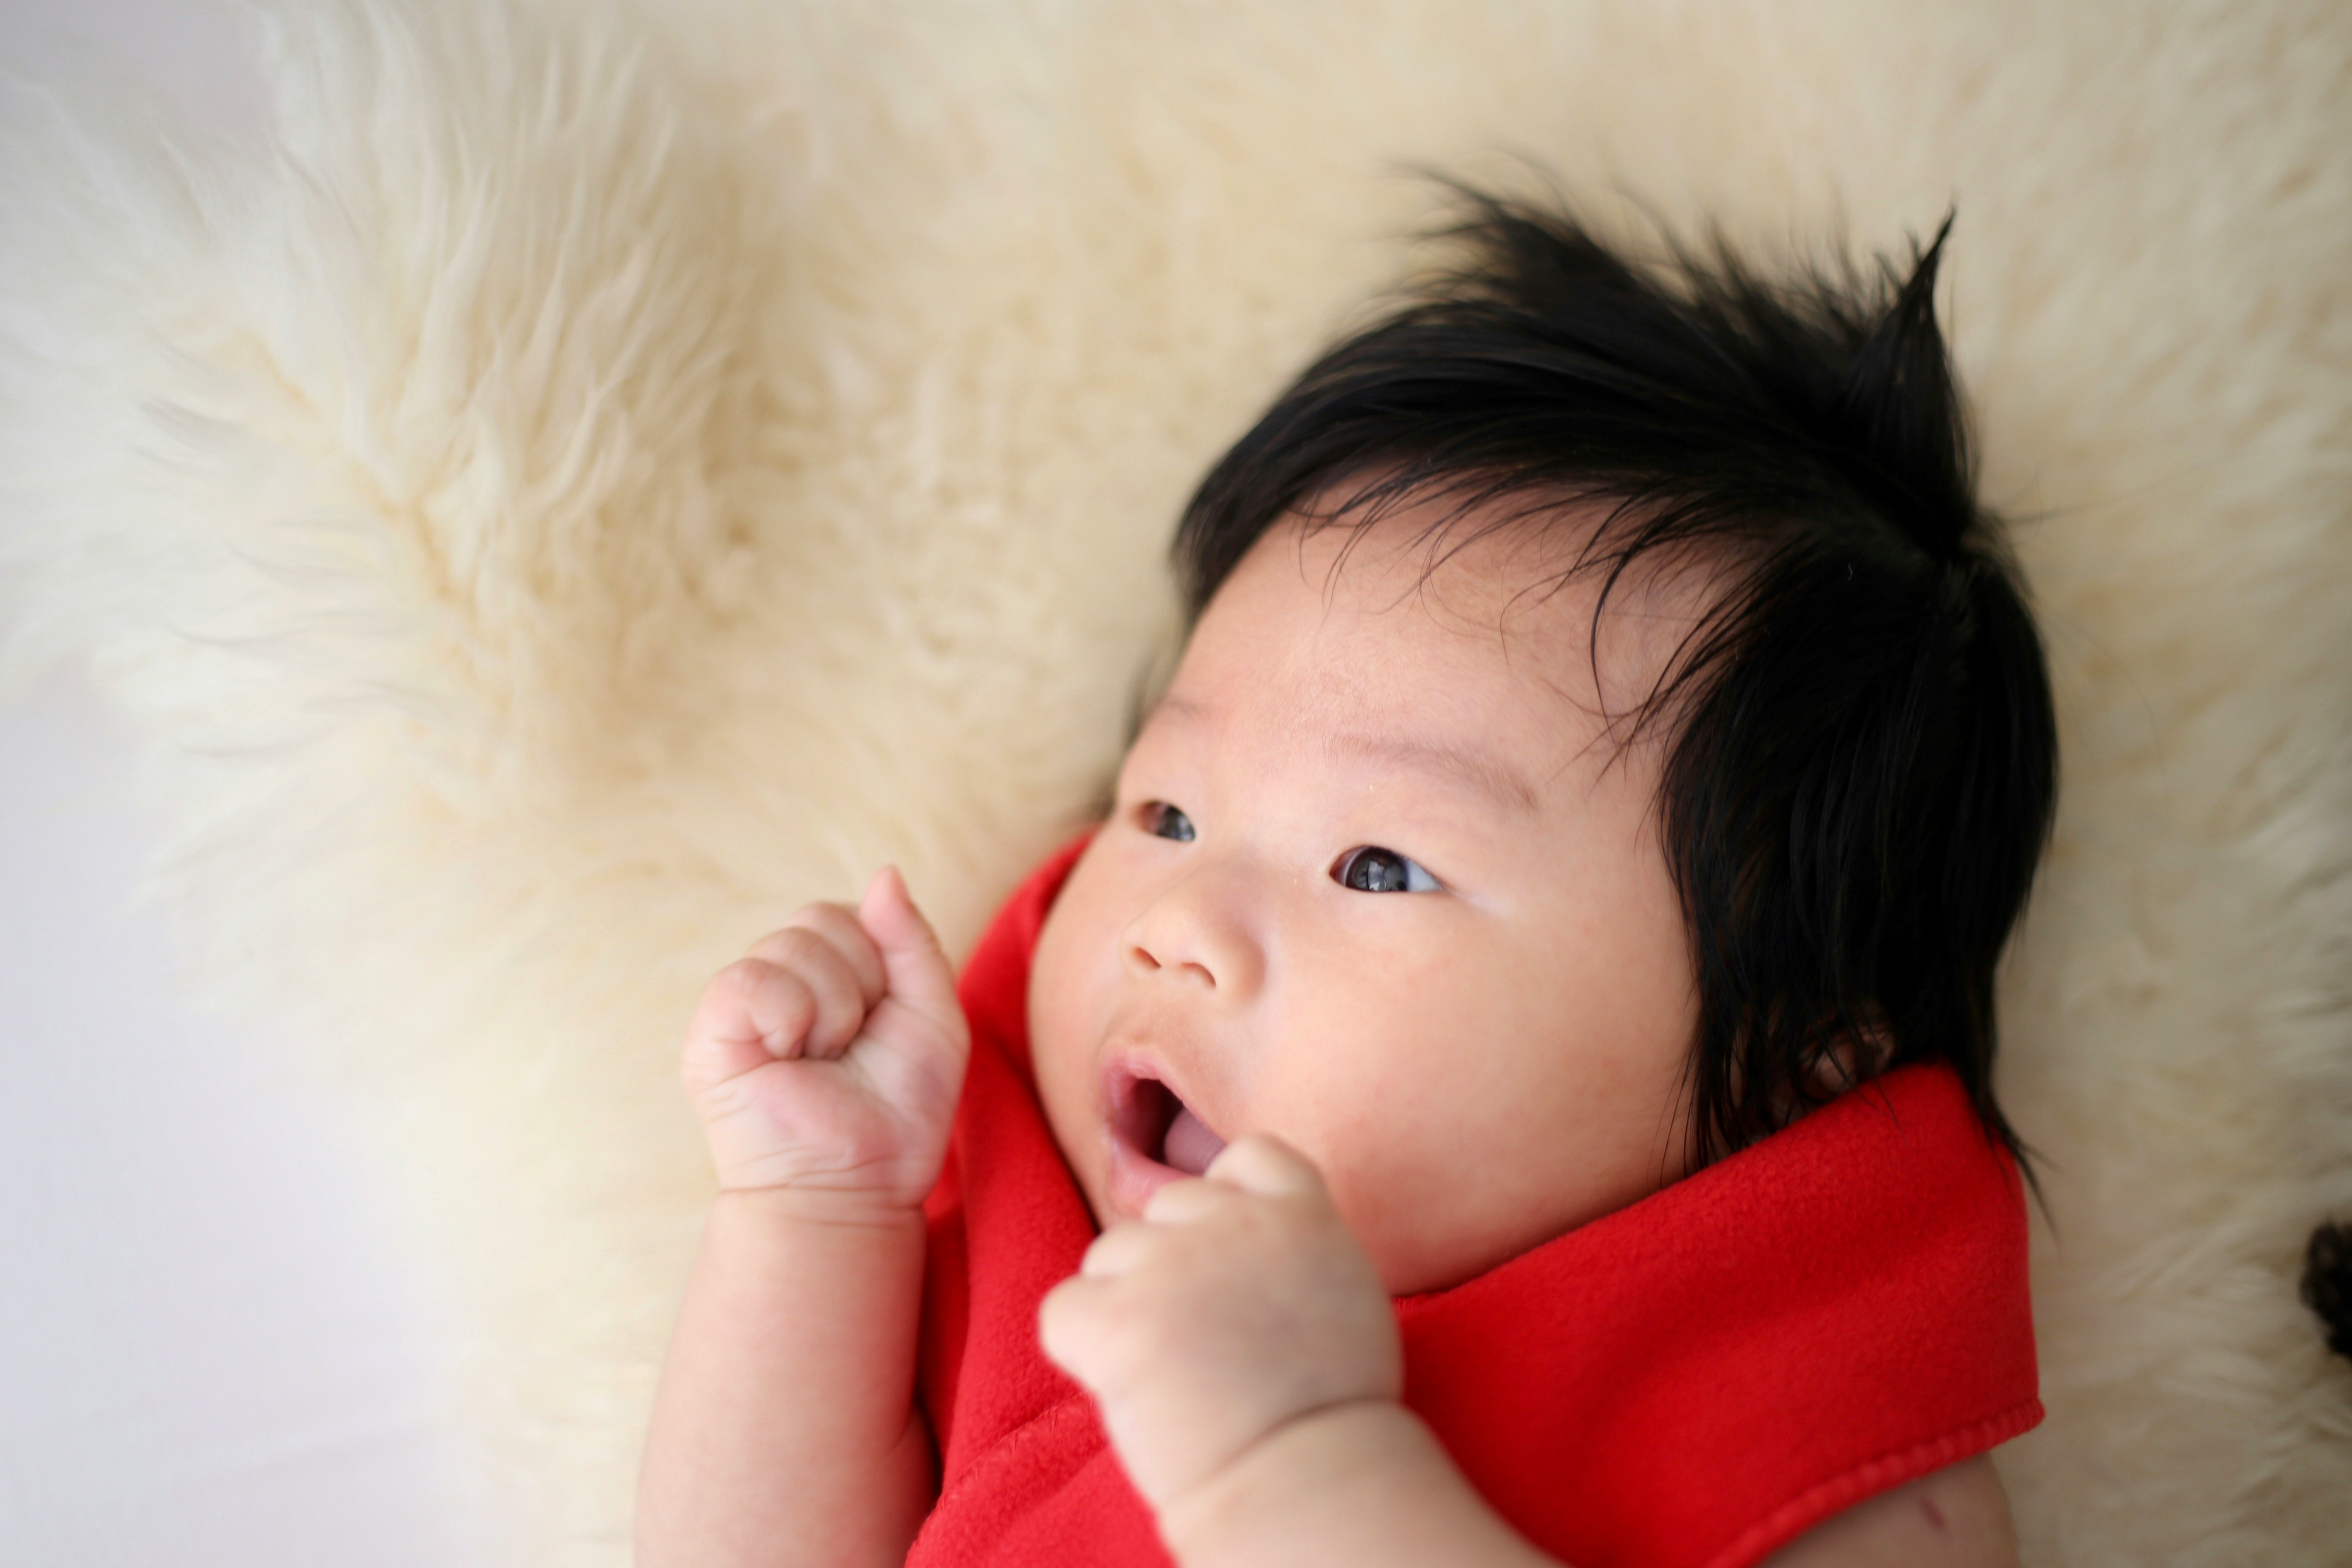 selective focus photography of baby wearing red top